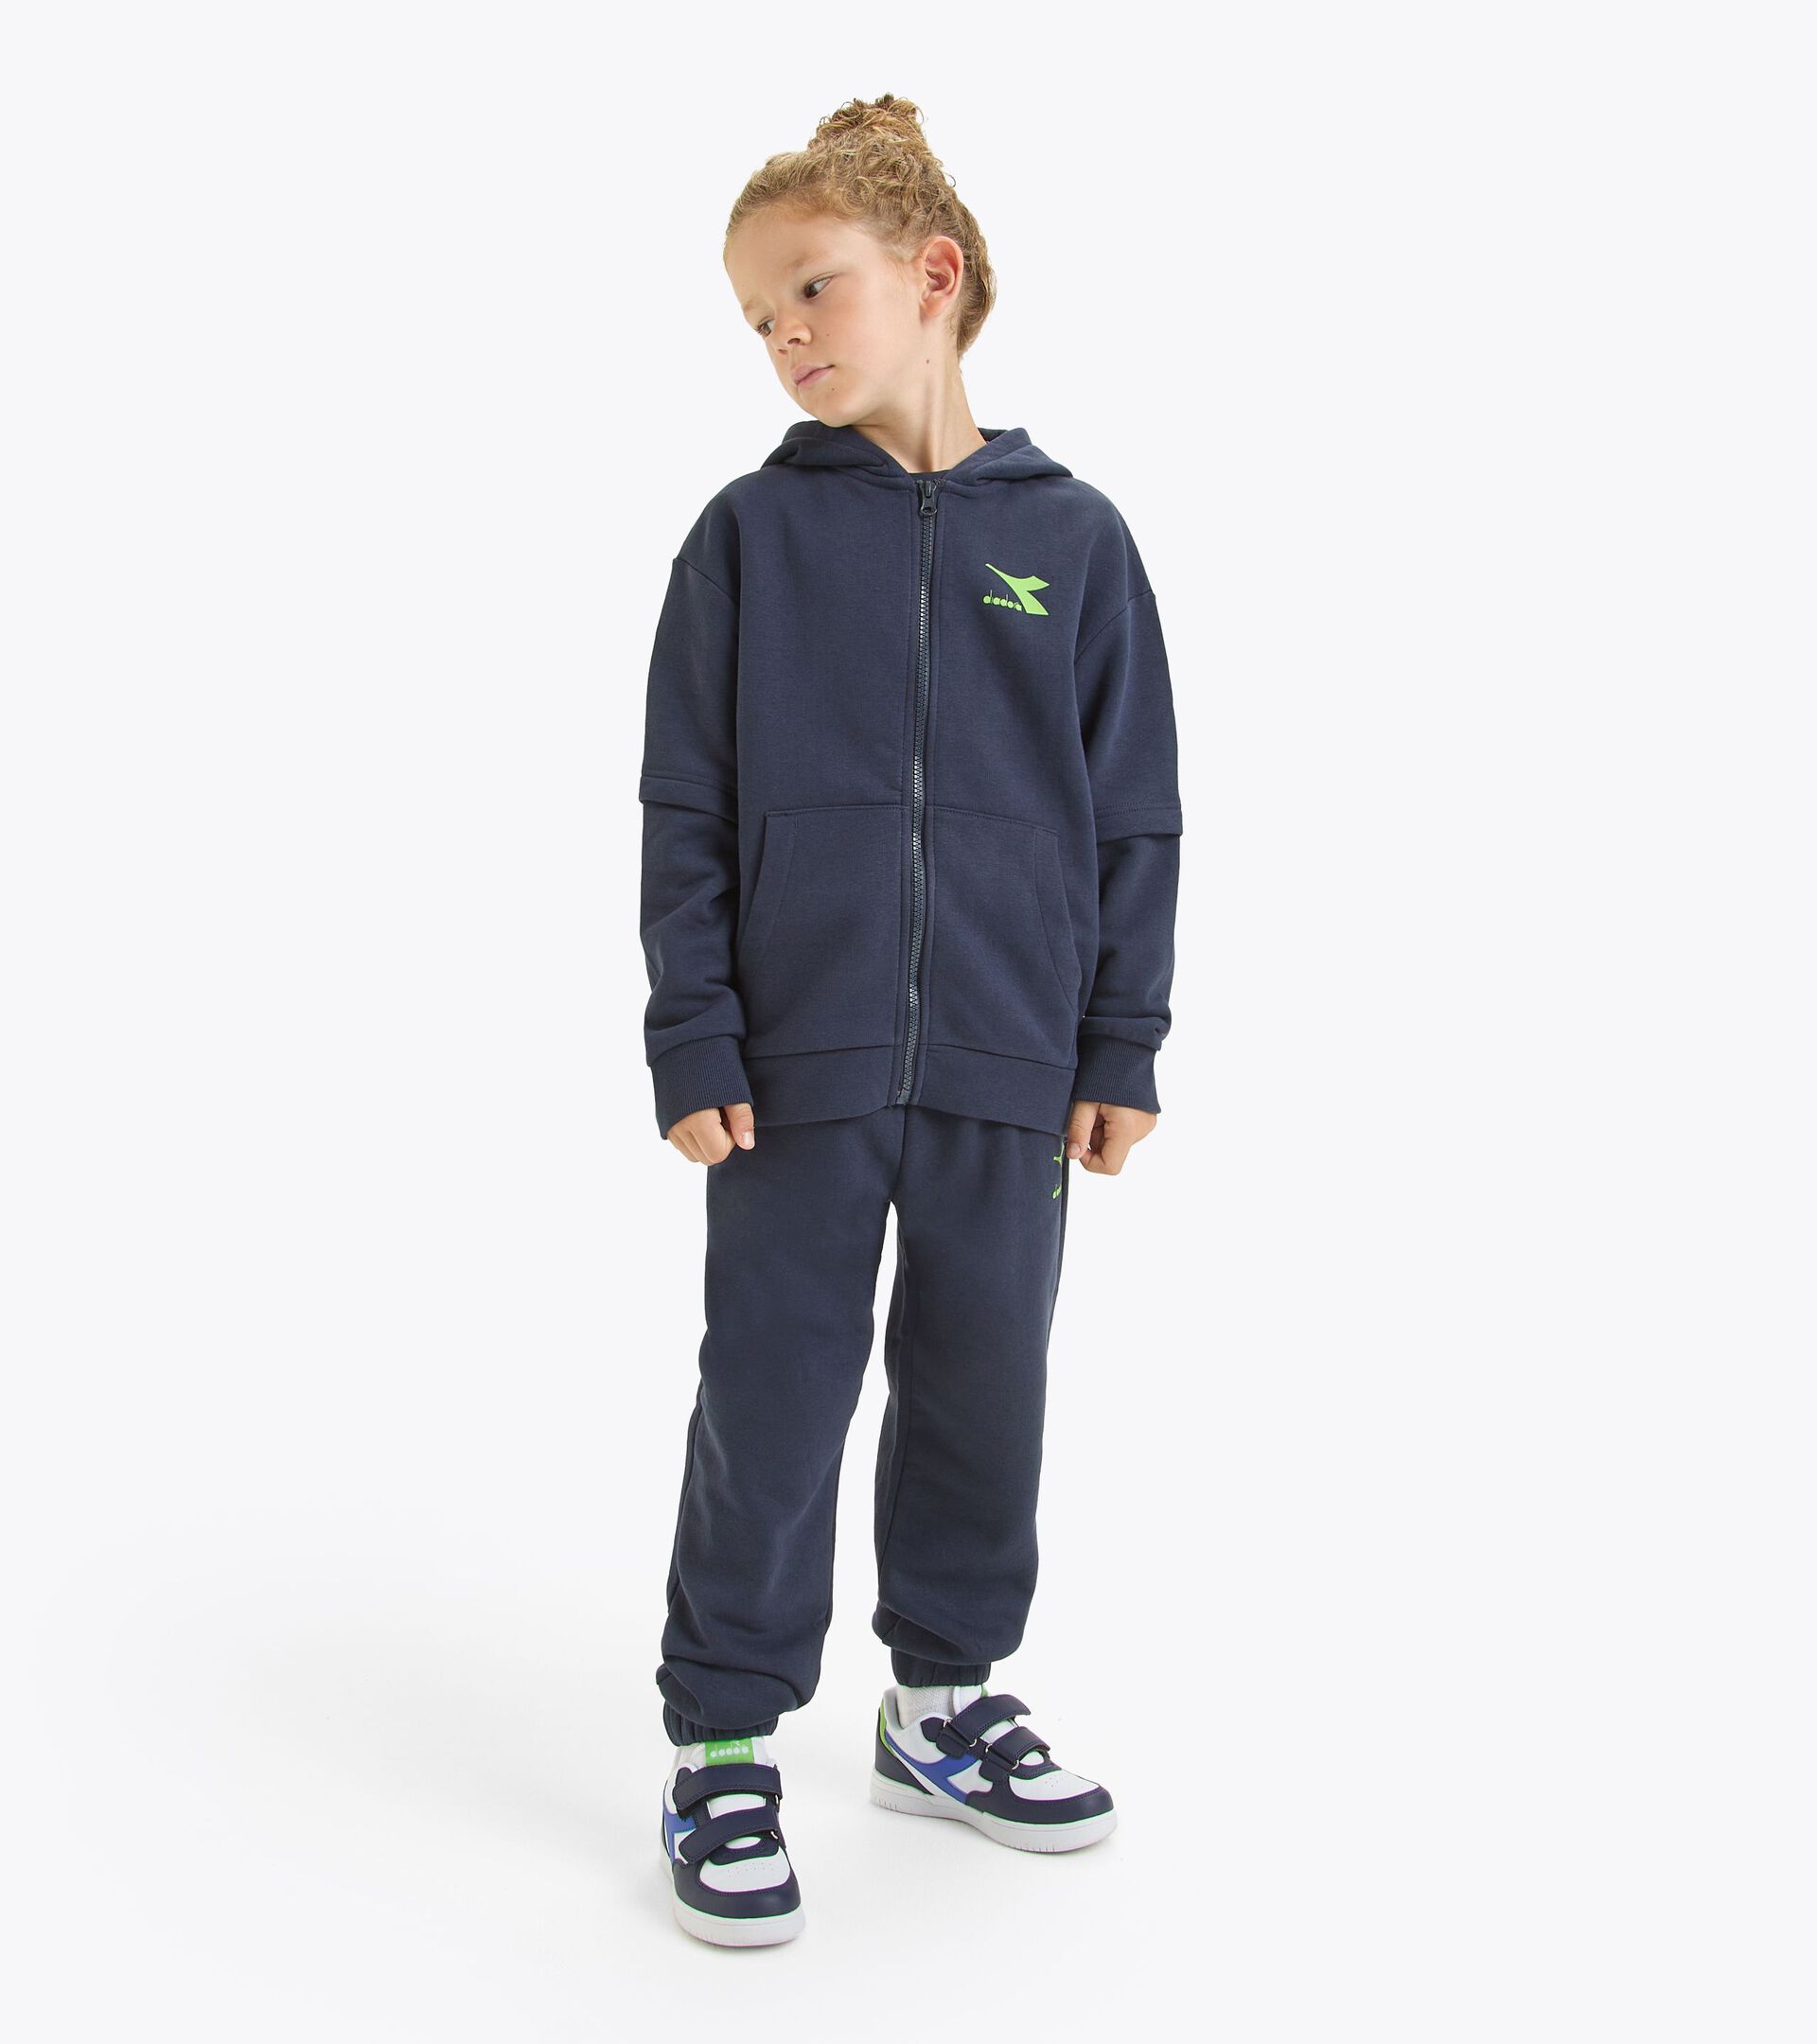 Adidas tracksuit child FZ blue Size 5/6 years Color Blue